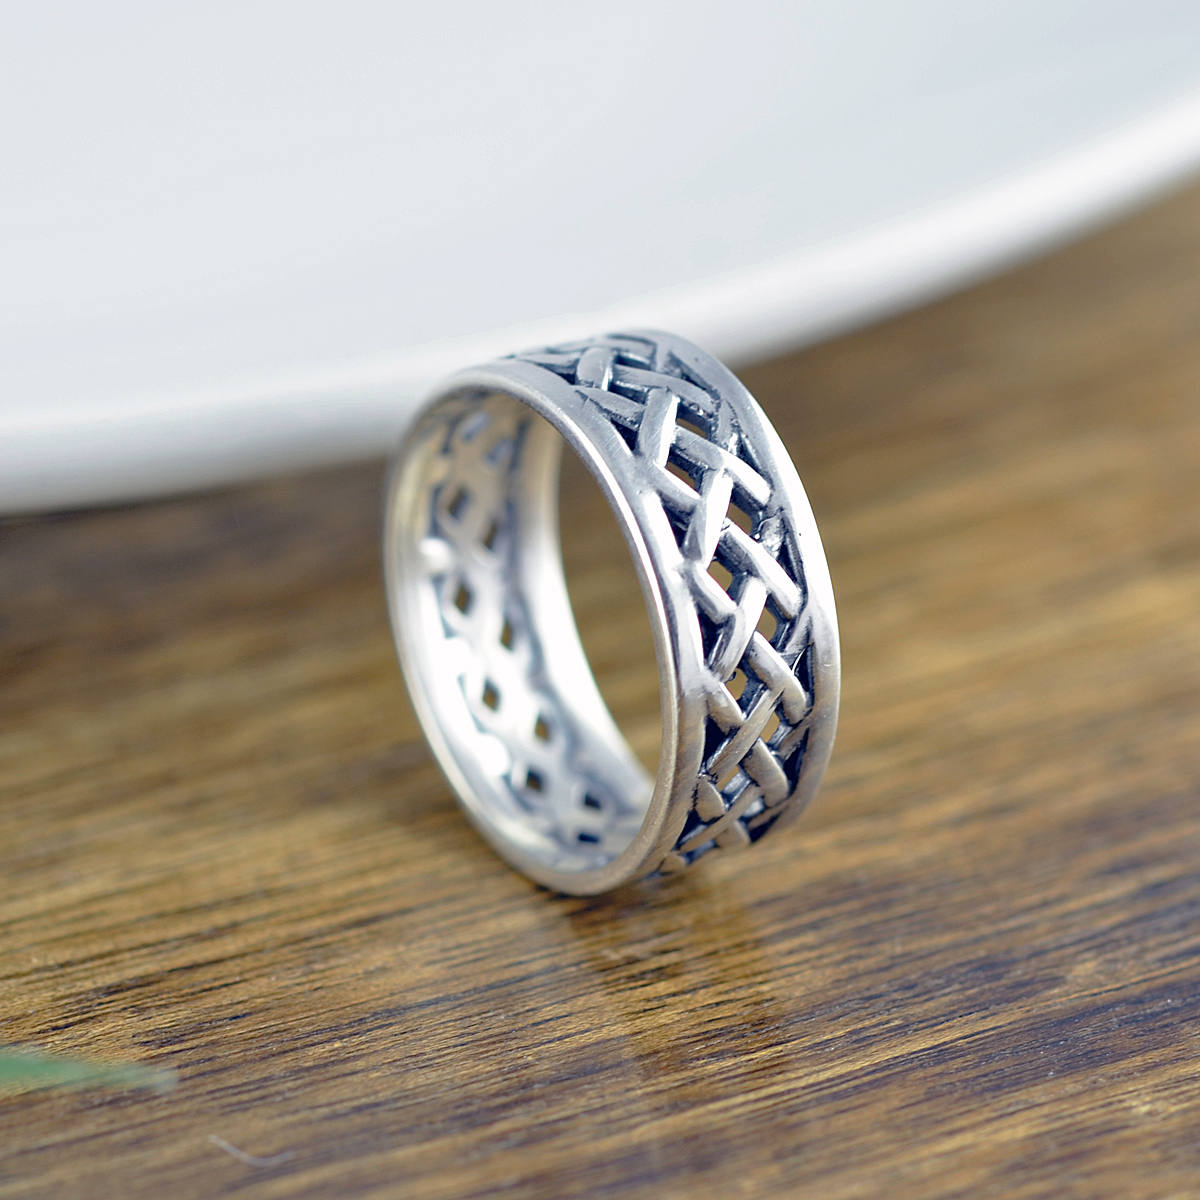 Sterling Silver Woven Band - Cigar Band Ring - Boho Ring - Modern Ring - Womens Rings - Gift For Her - Statement Ring